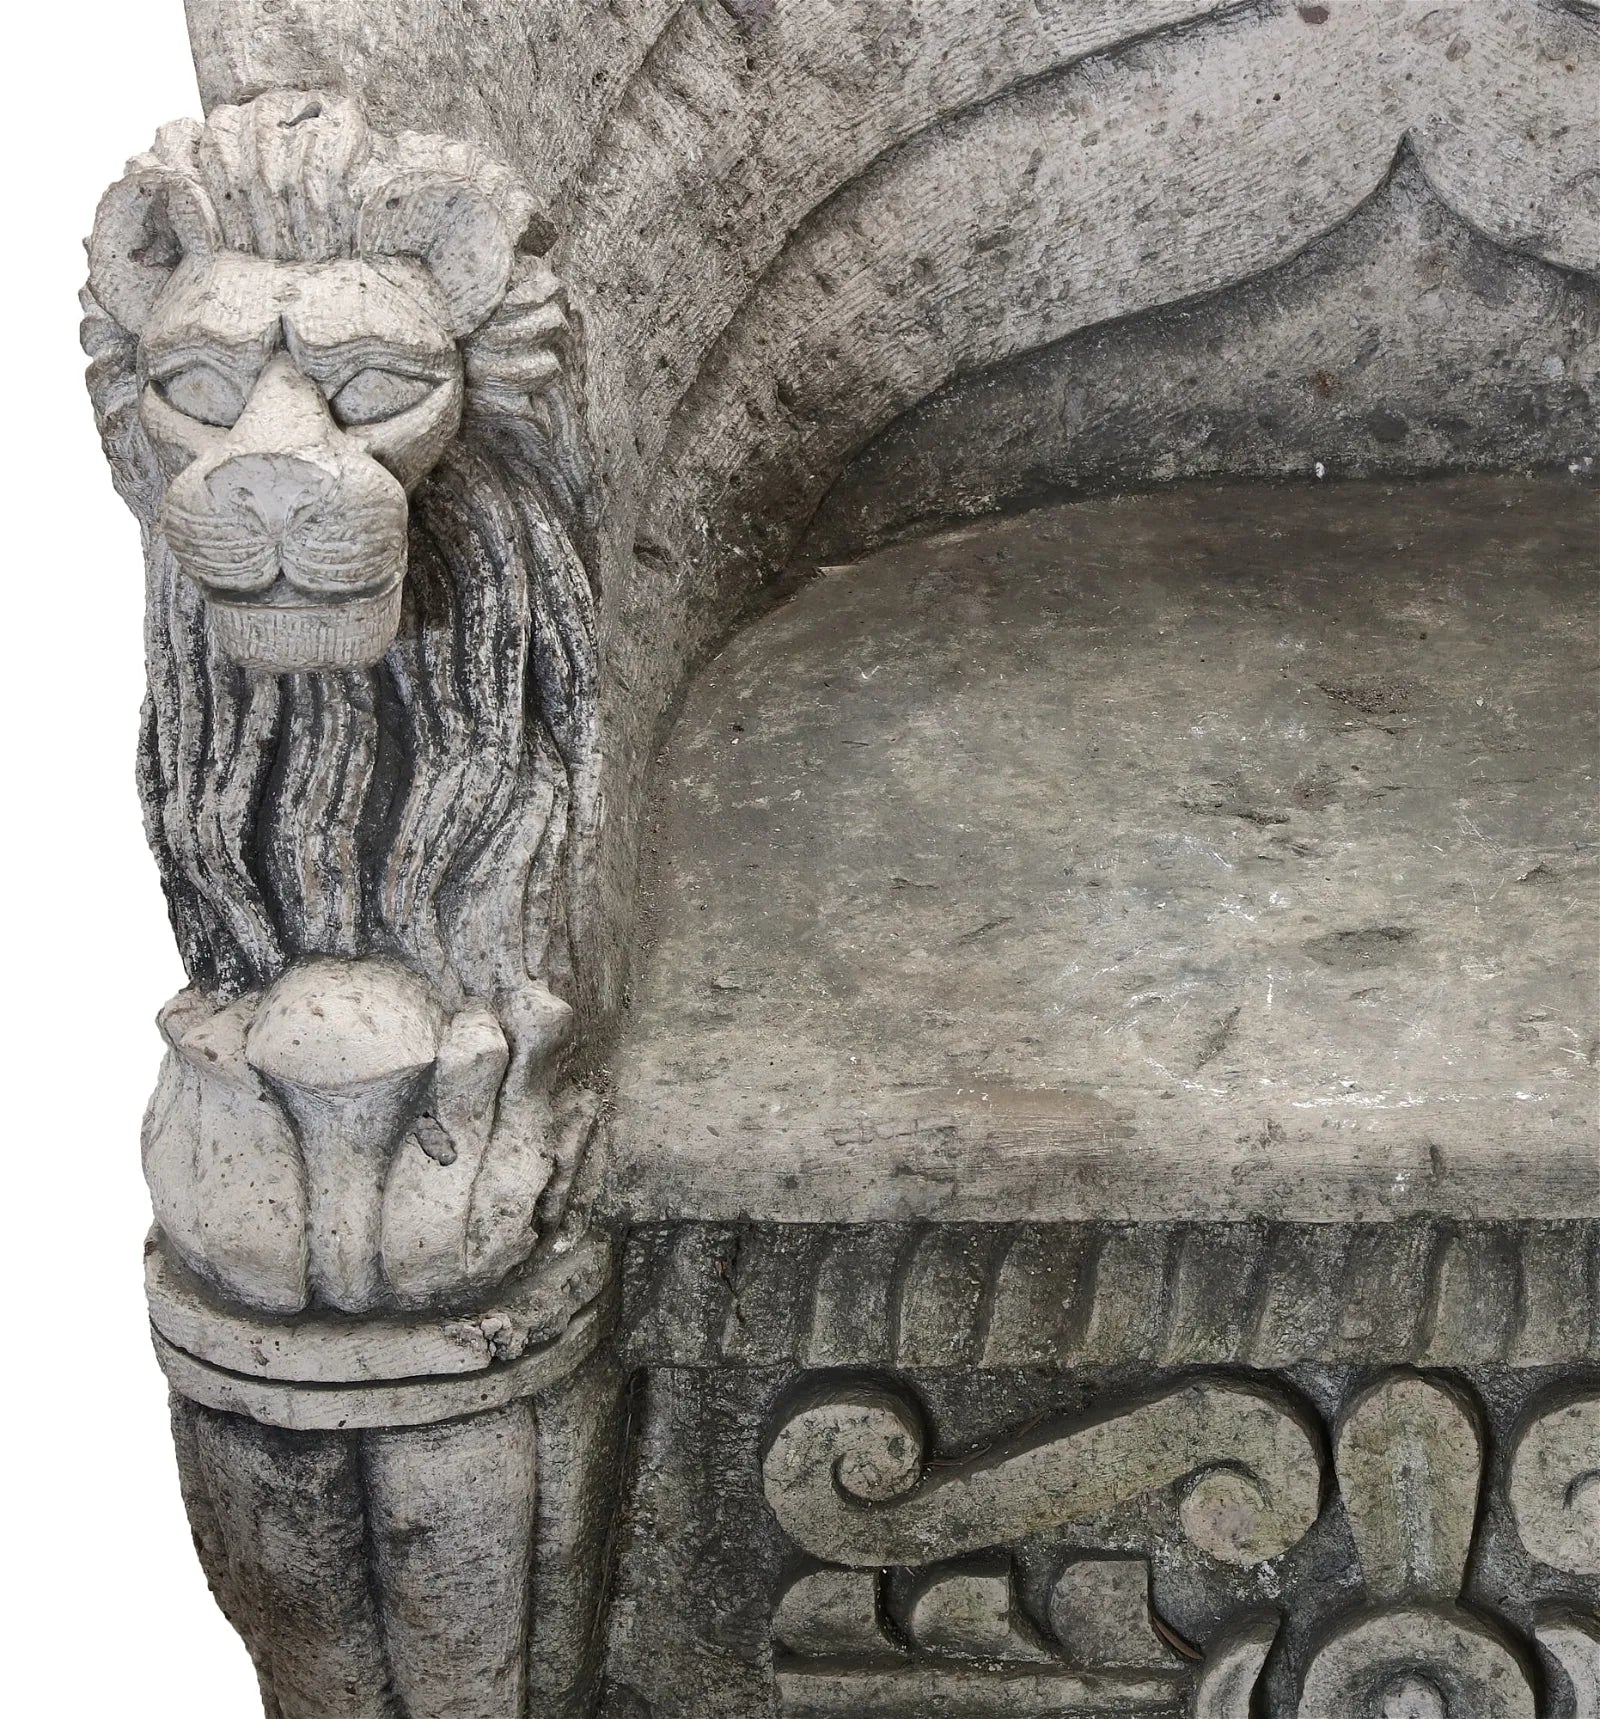 AA4-004: Pair of Elizabethan Style Carved Limestone Garden Seats